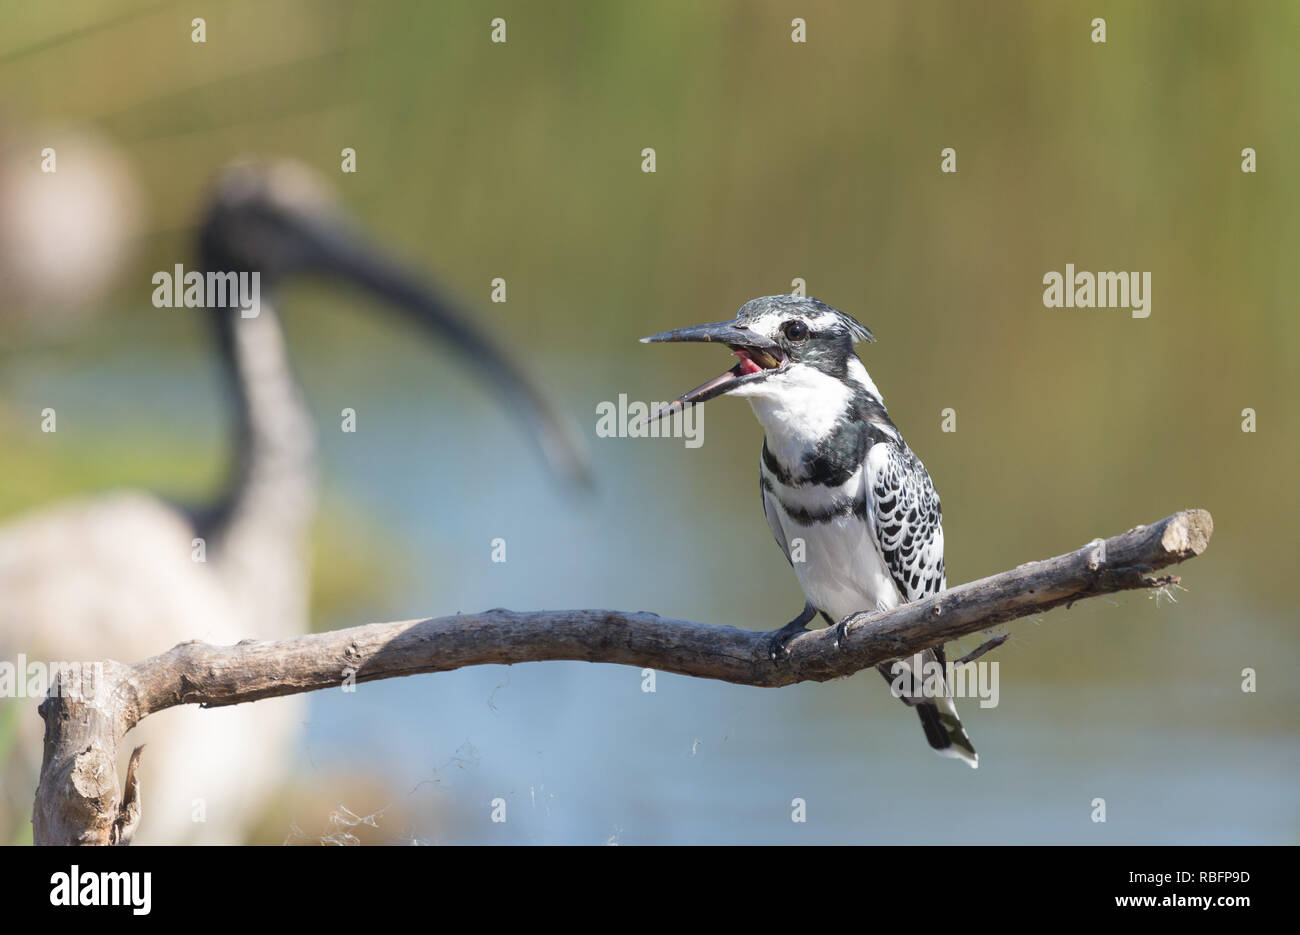 Pied Kingfisher (Ceryle rudis) bird with fish or prey in its beak and in the process of swallowing it perched on a branch in Cape Town South Africa Stock Photo